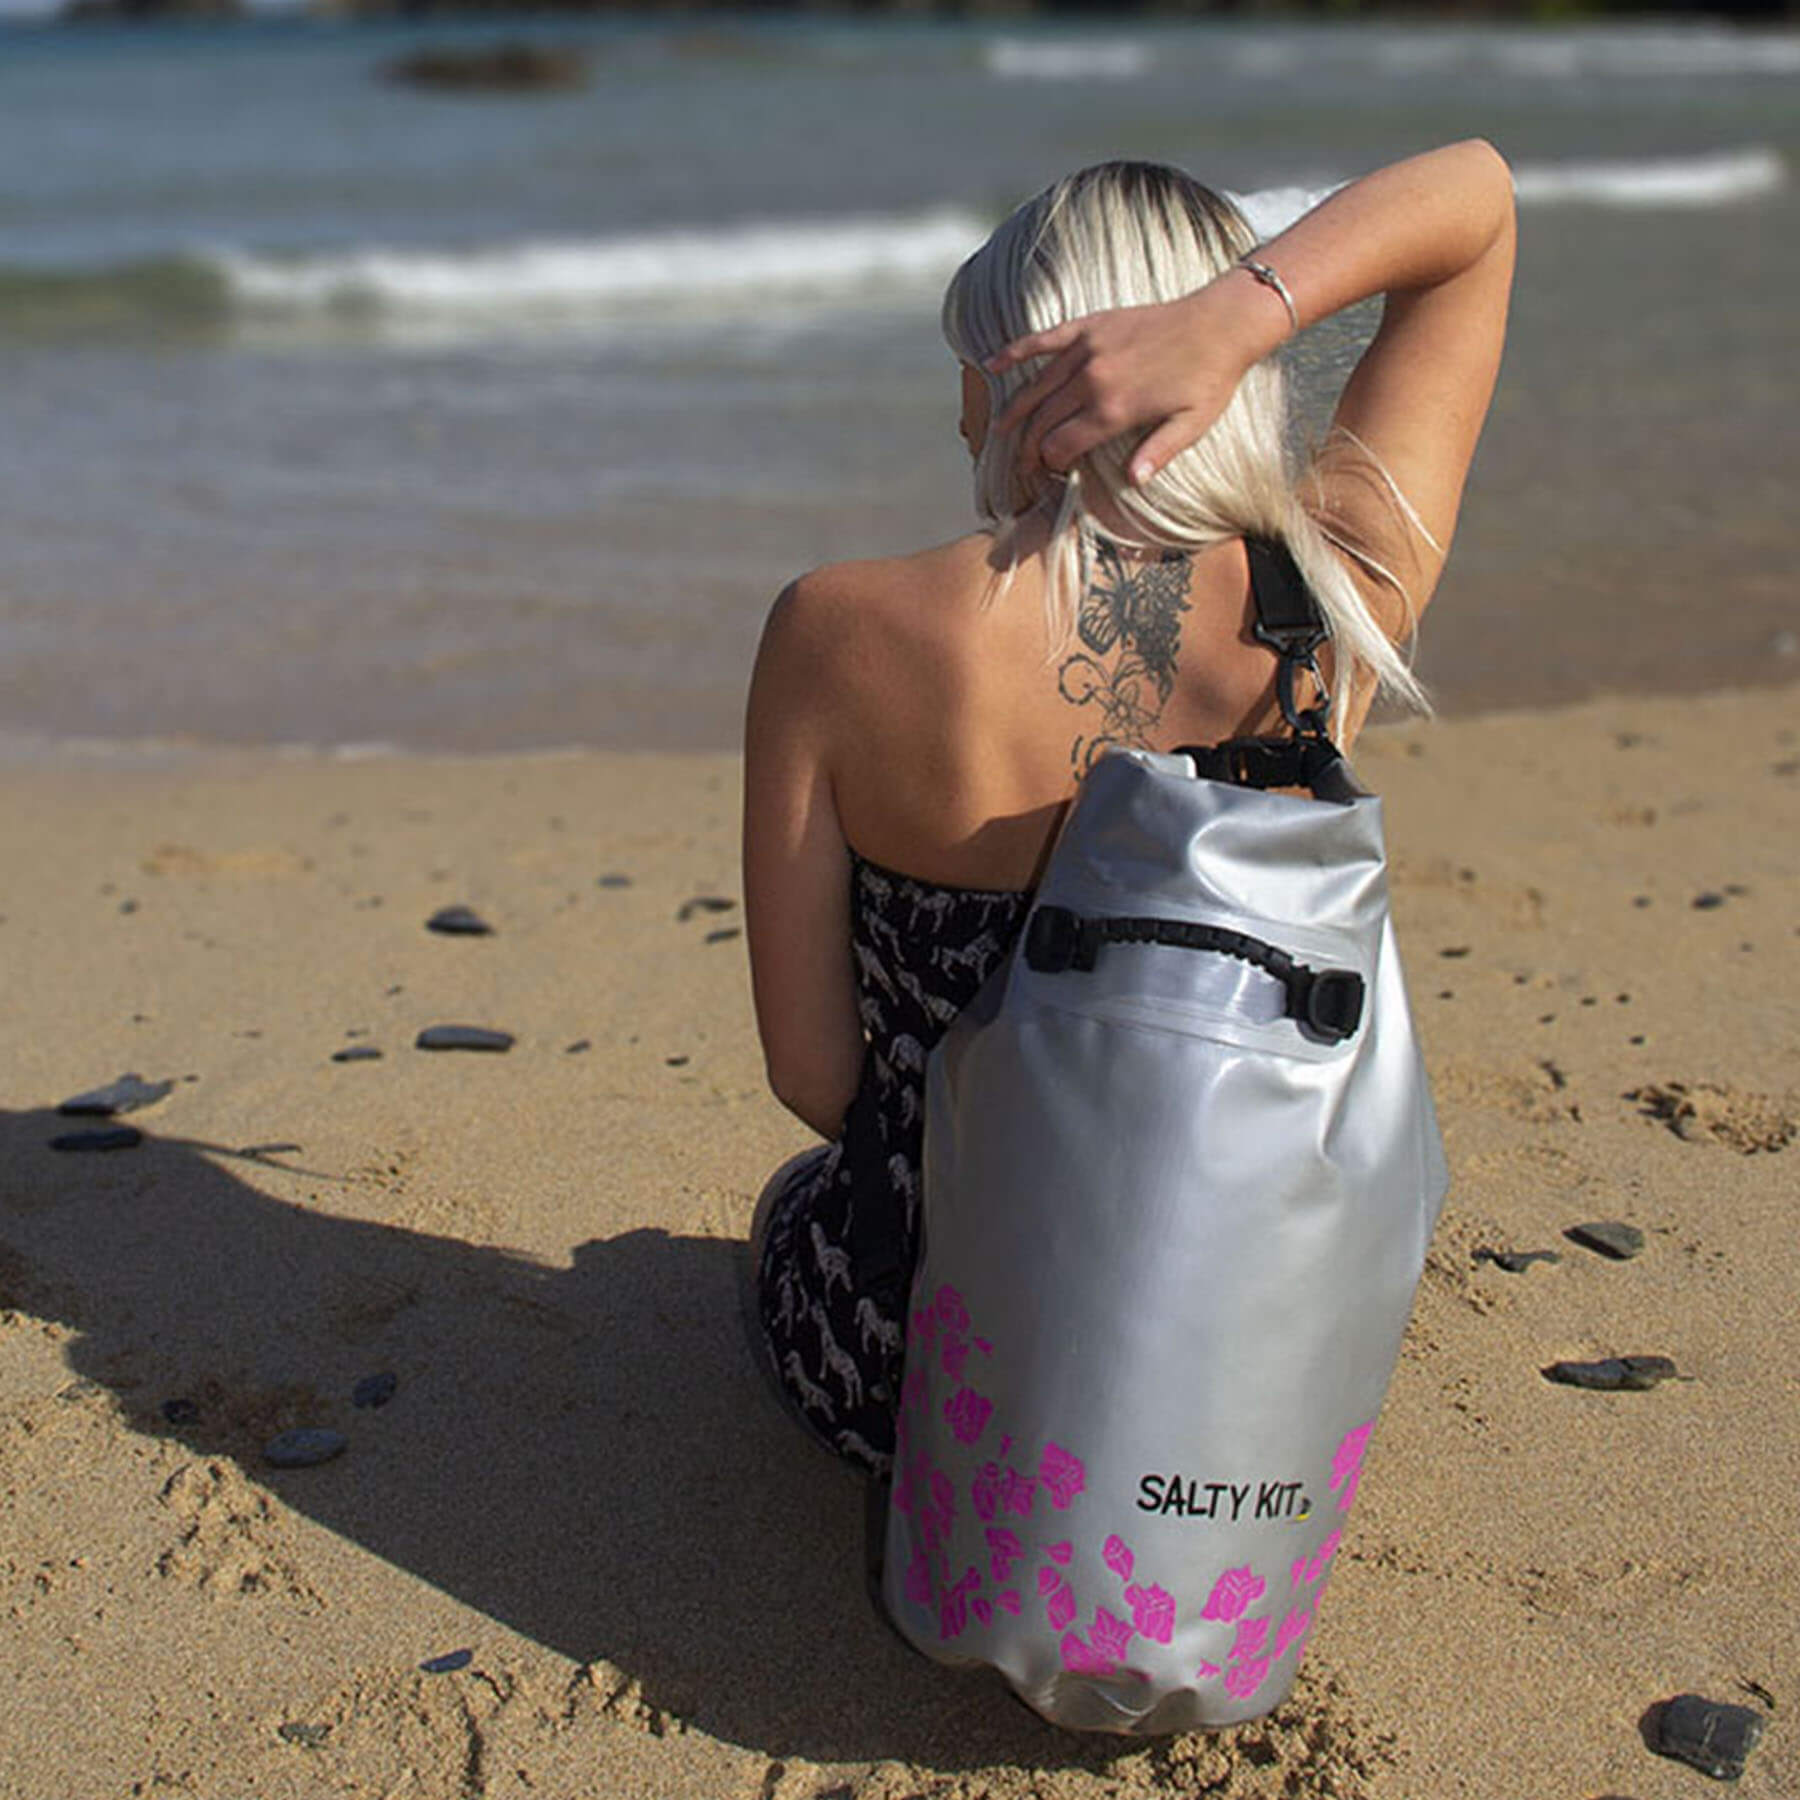  the bougainvillea beach bag very stylish in gloss silver with pink bougainvillea flowers 